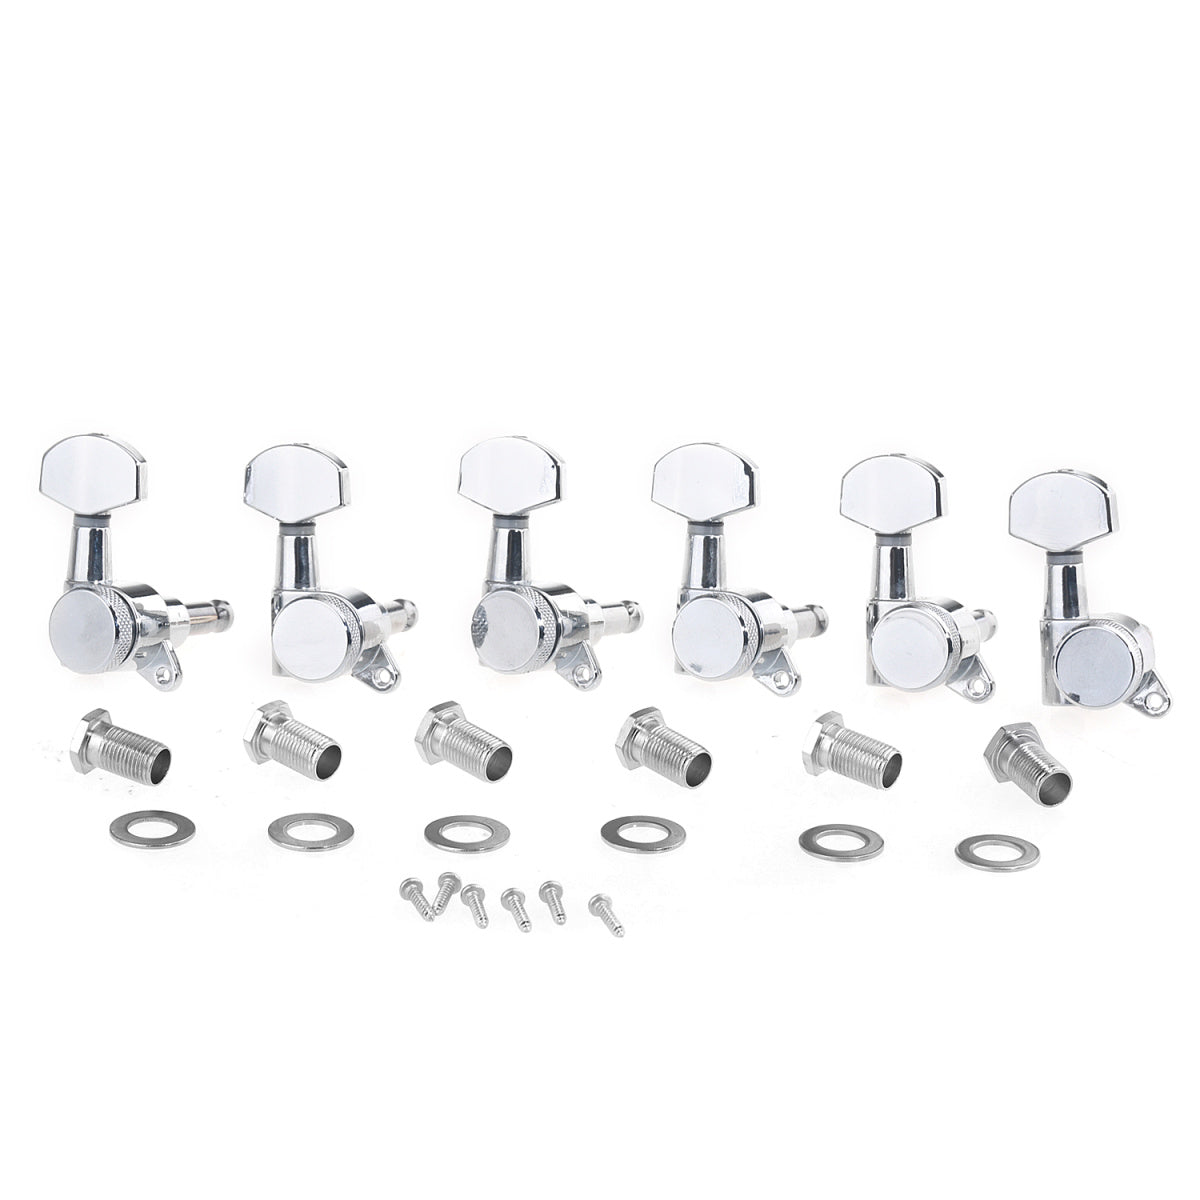 Musiclily Pro 6 in Line Guitar Locking Tuners Tuning Machines Set for Stratocaster Telecaster Style,Chrome